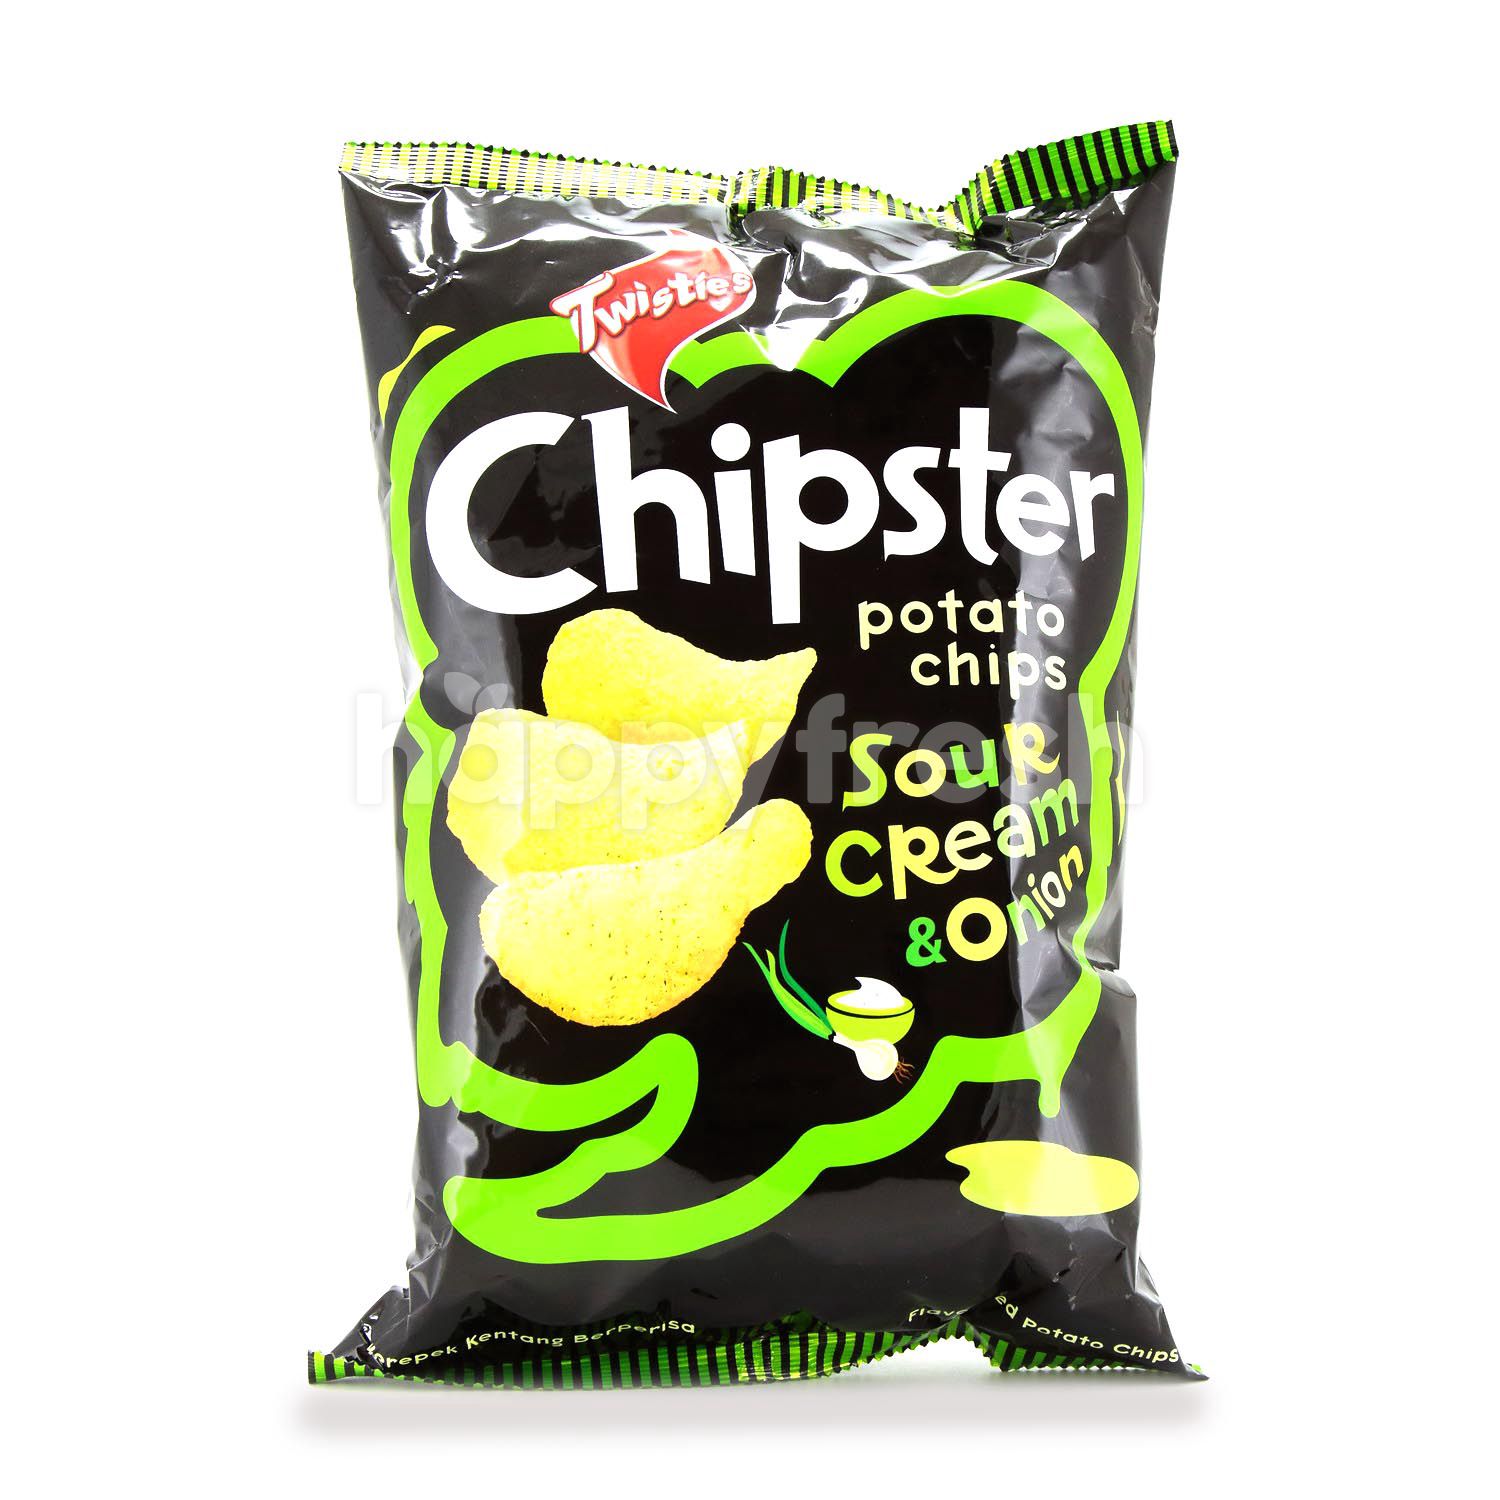 Chipster sour cream